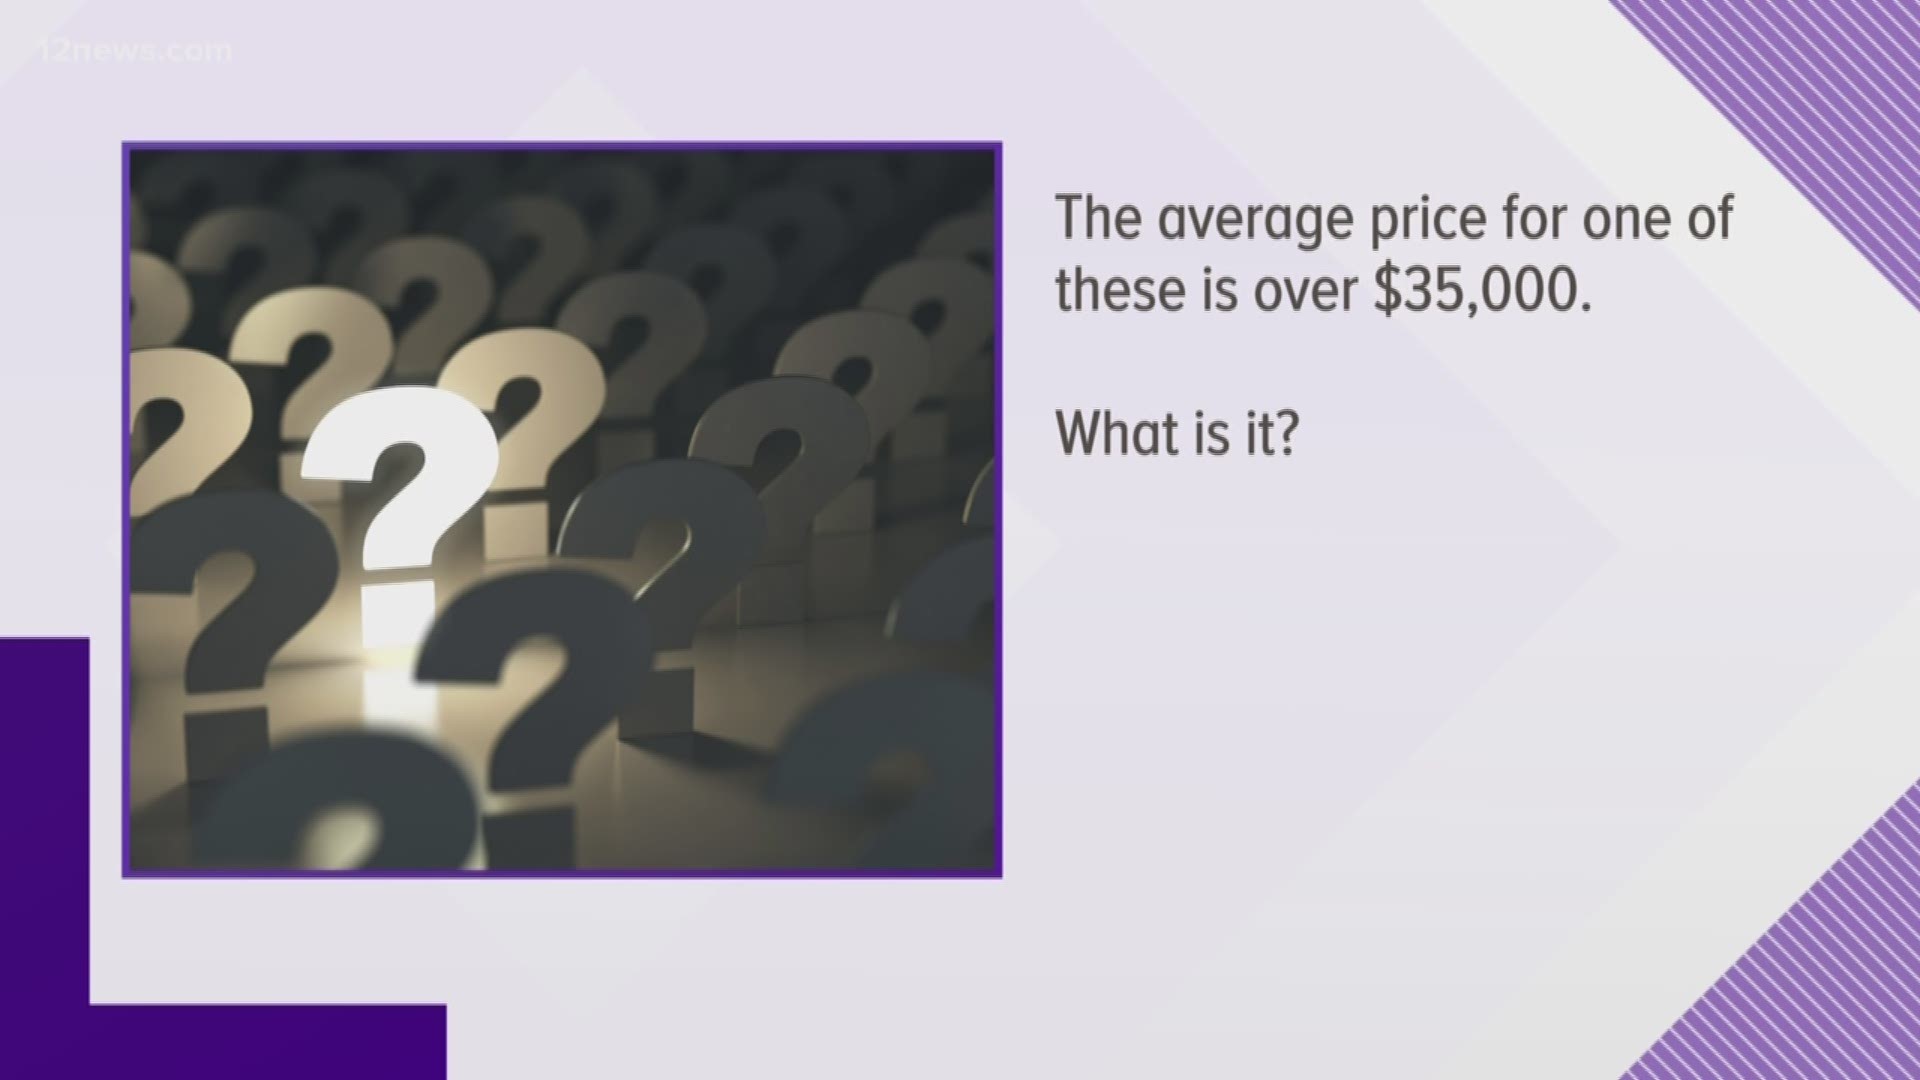 The average one of these costs over $35,000. What is it?